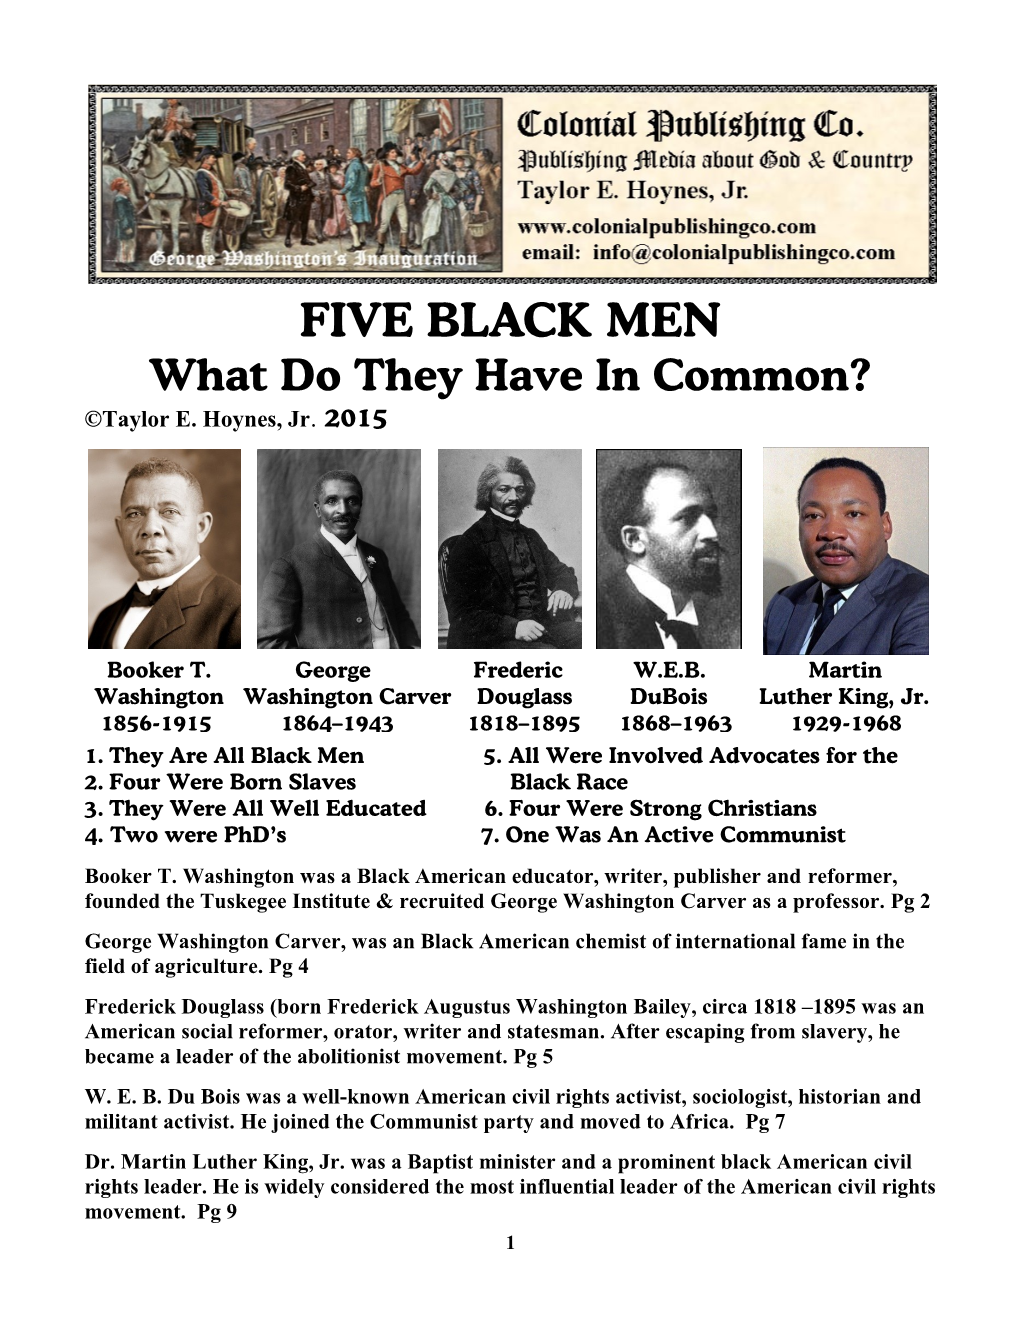 FIVE BLACK MEN What Do They Have in Common? ©Taylor E